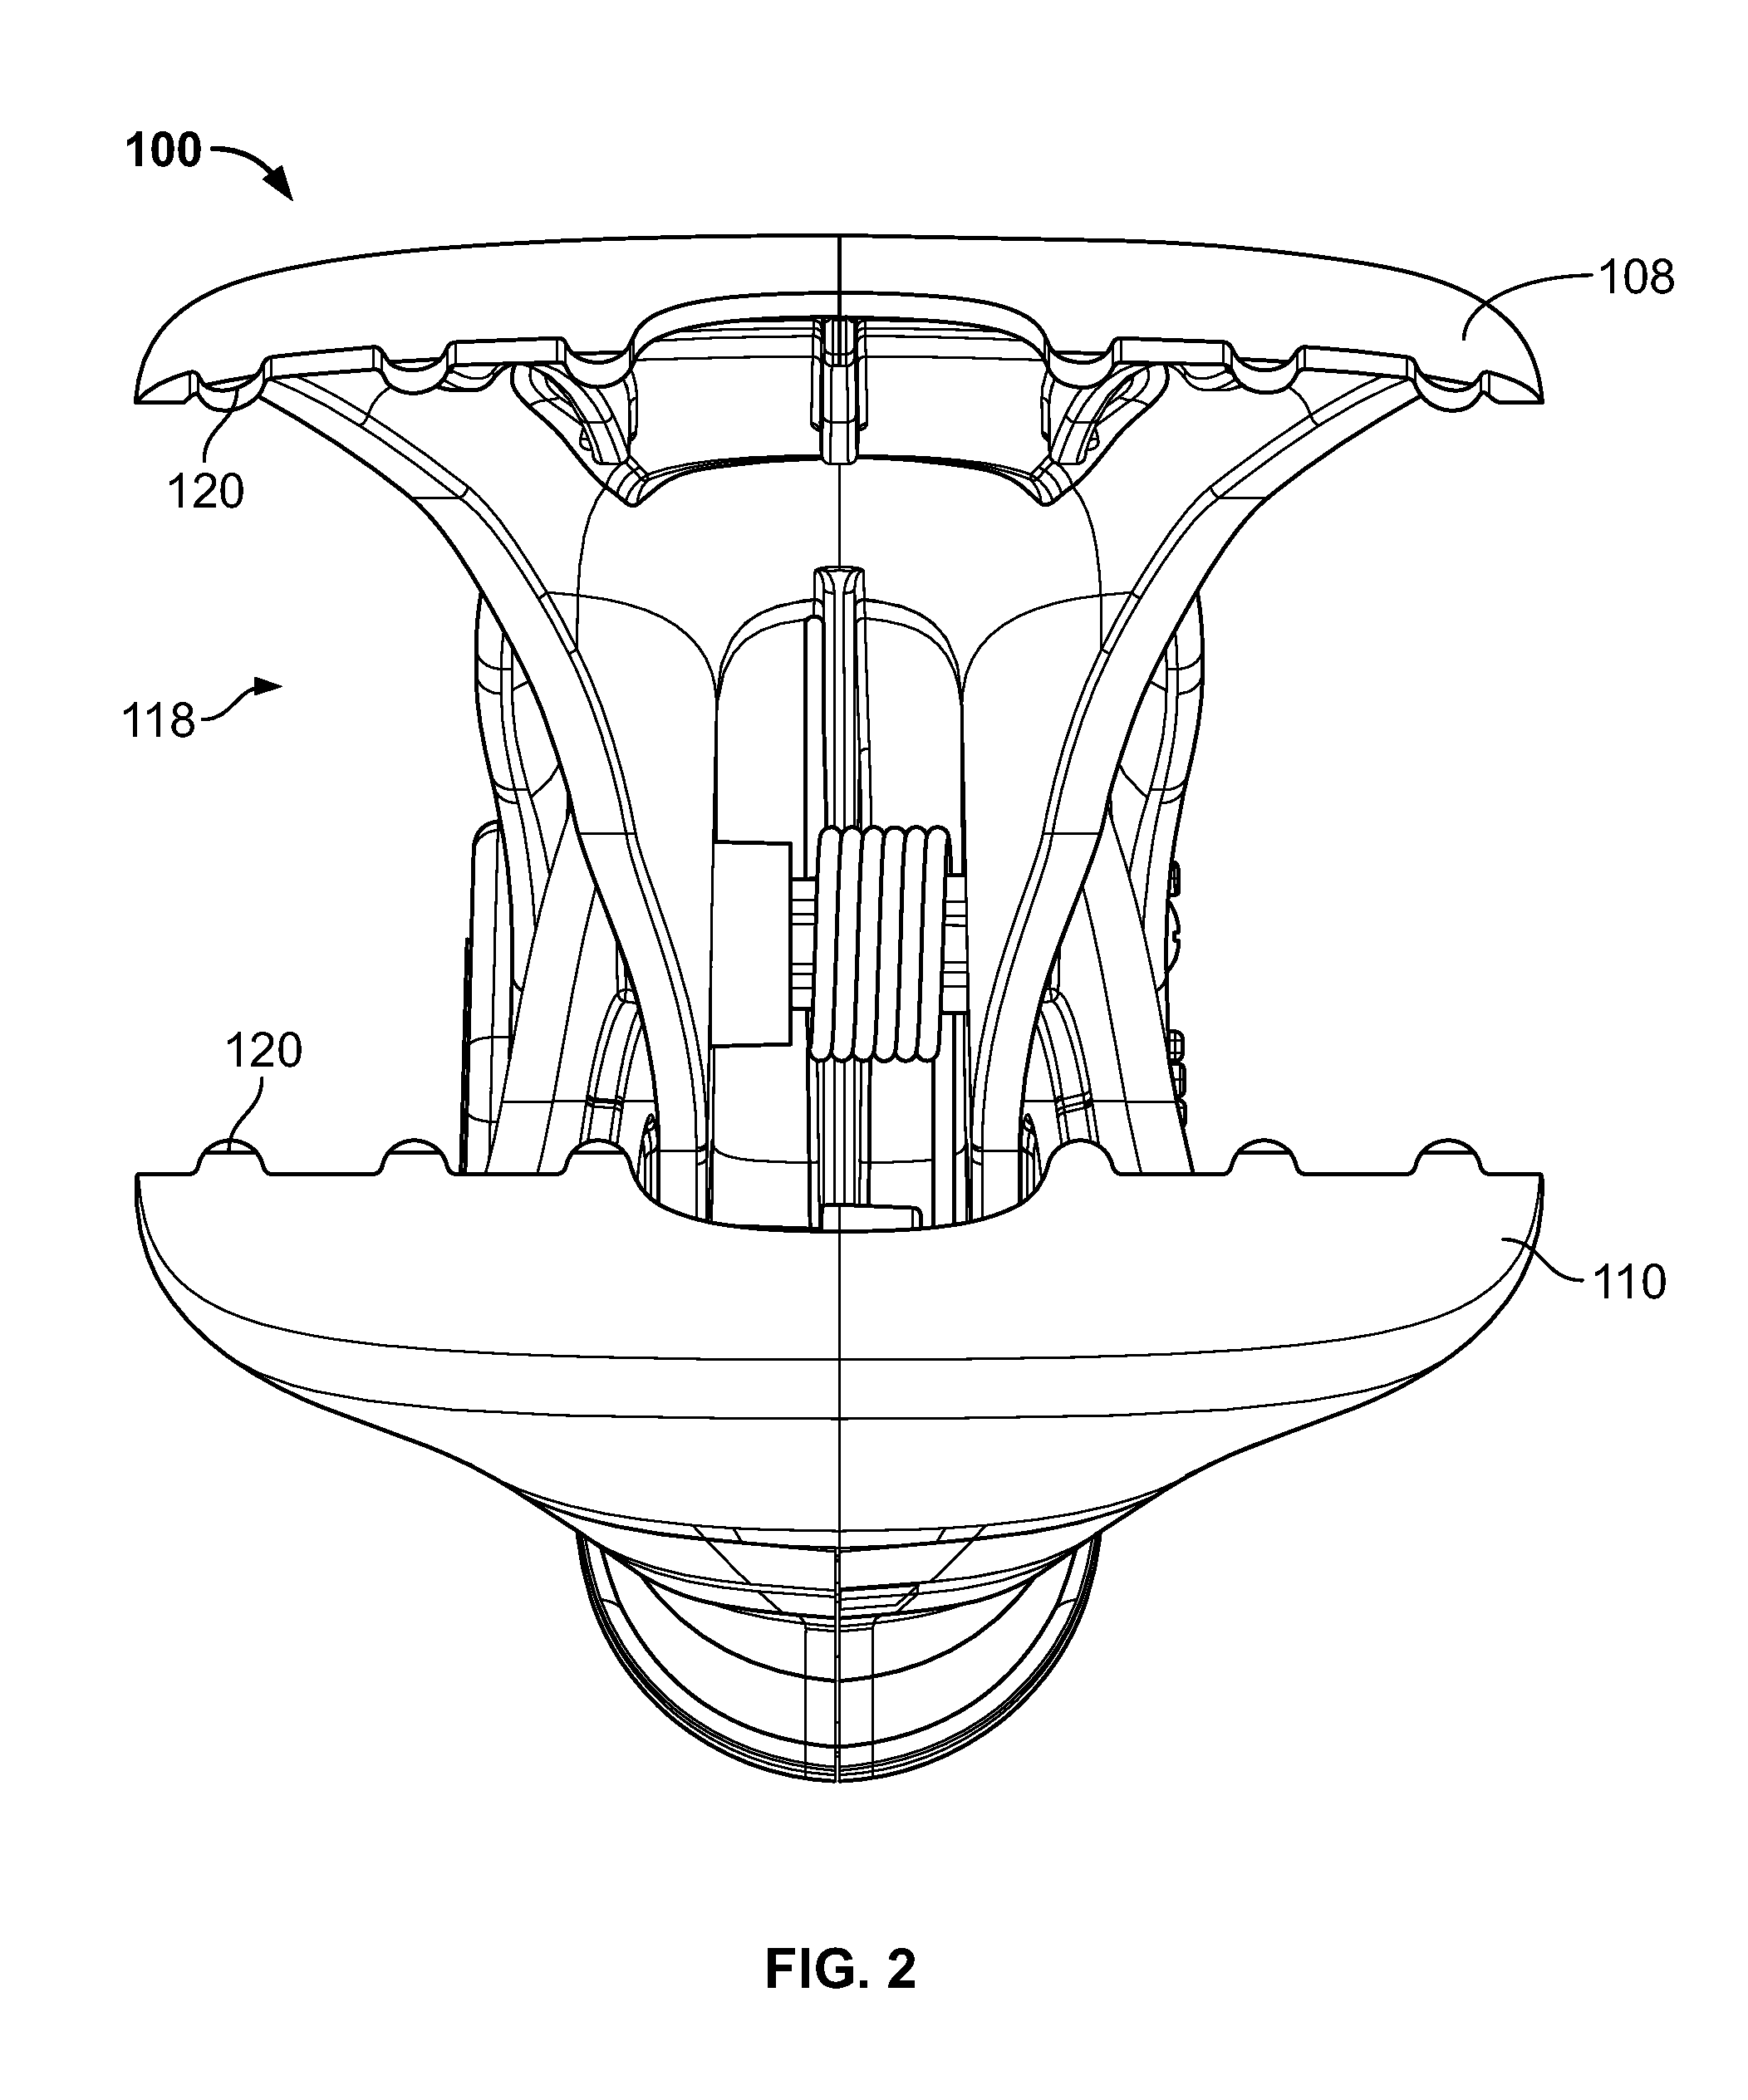 Apparatus to retain a cleaning implement